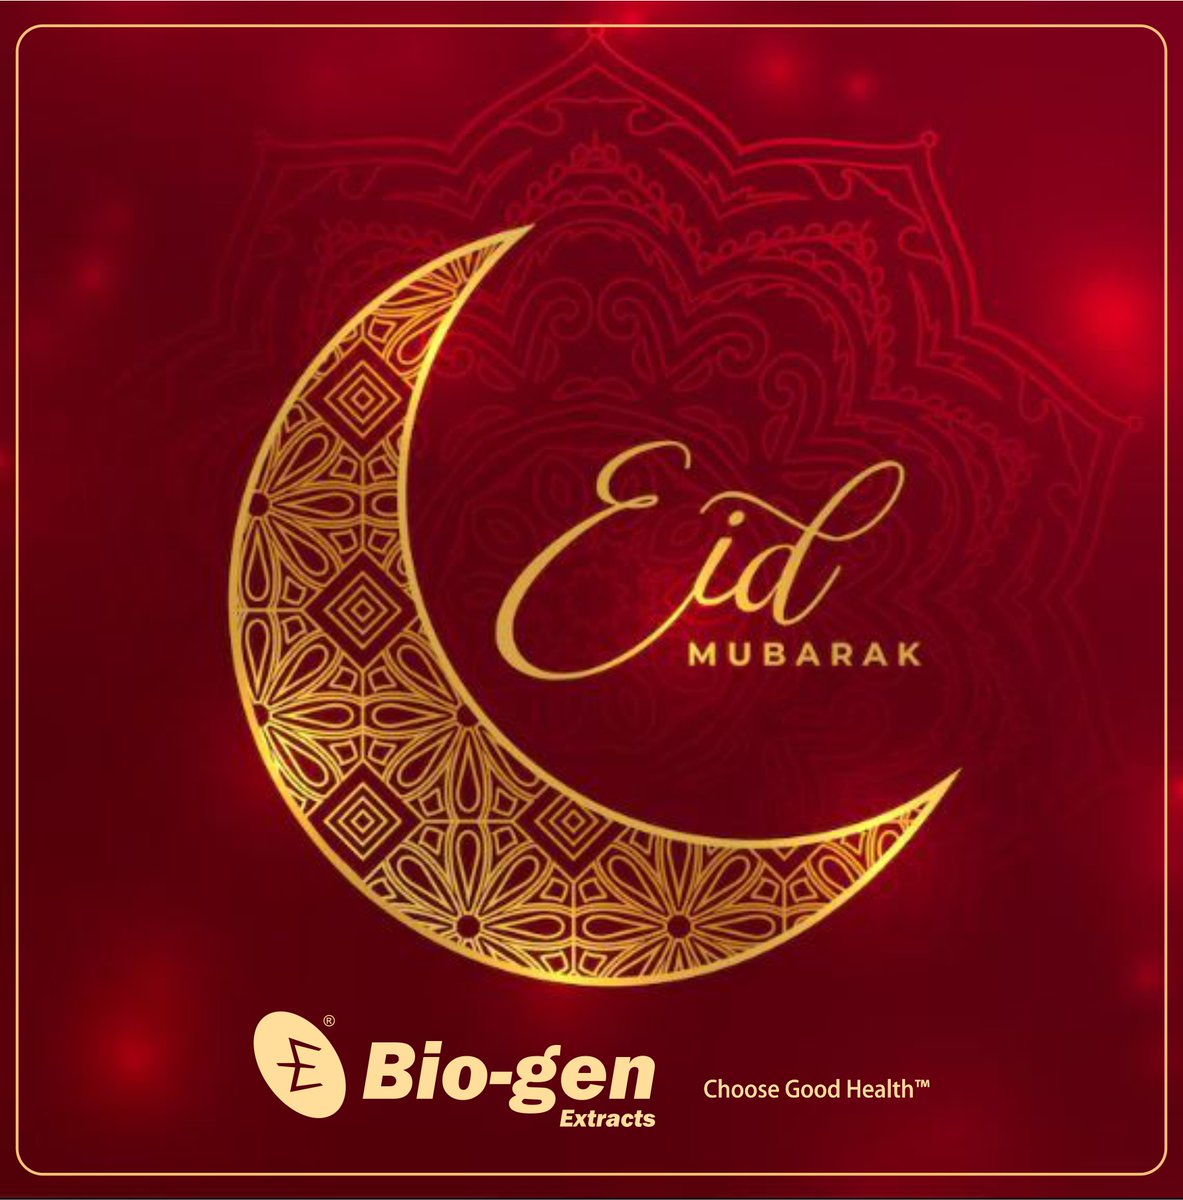 Eid Mubarak!
 
May this Eid bring blessings, love, and  prosperity. Let's cherish each other, spread kindness, and remember the  less fortunate and pray for many opportunities for everyone to Choose  Good Health™.
 
#biogenextracts #Eid #Eid2024 #Eidalfitr #Eidmubarak